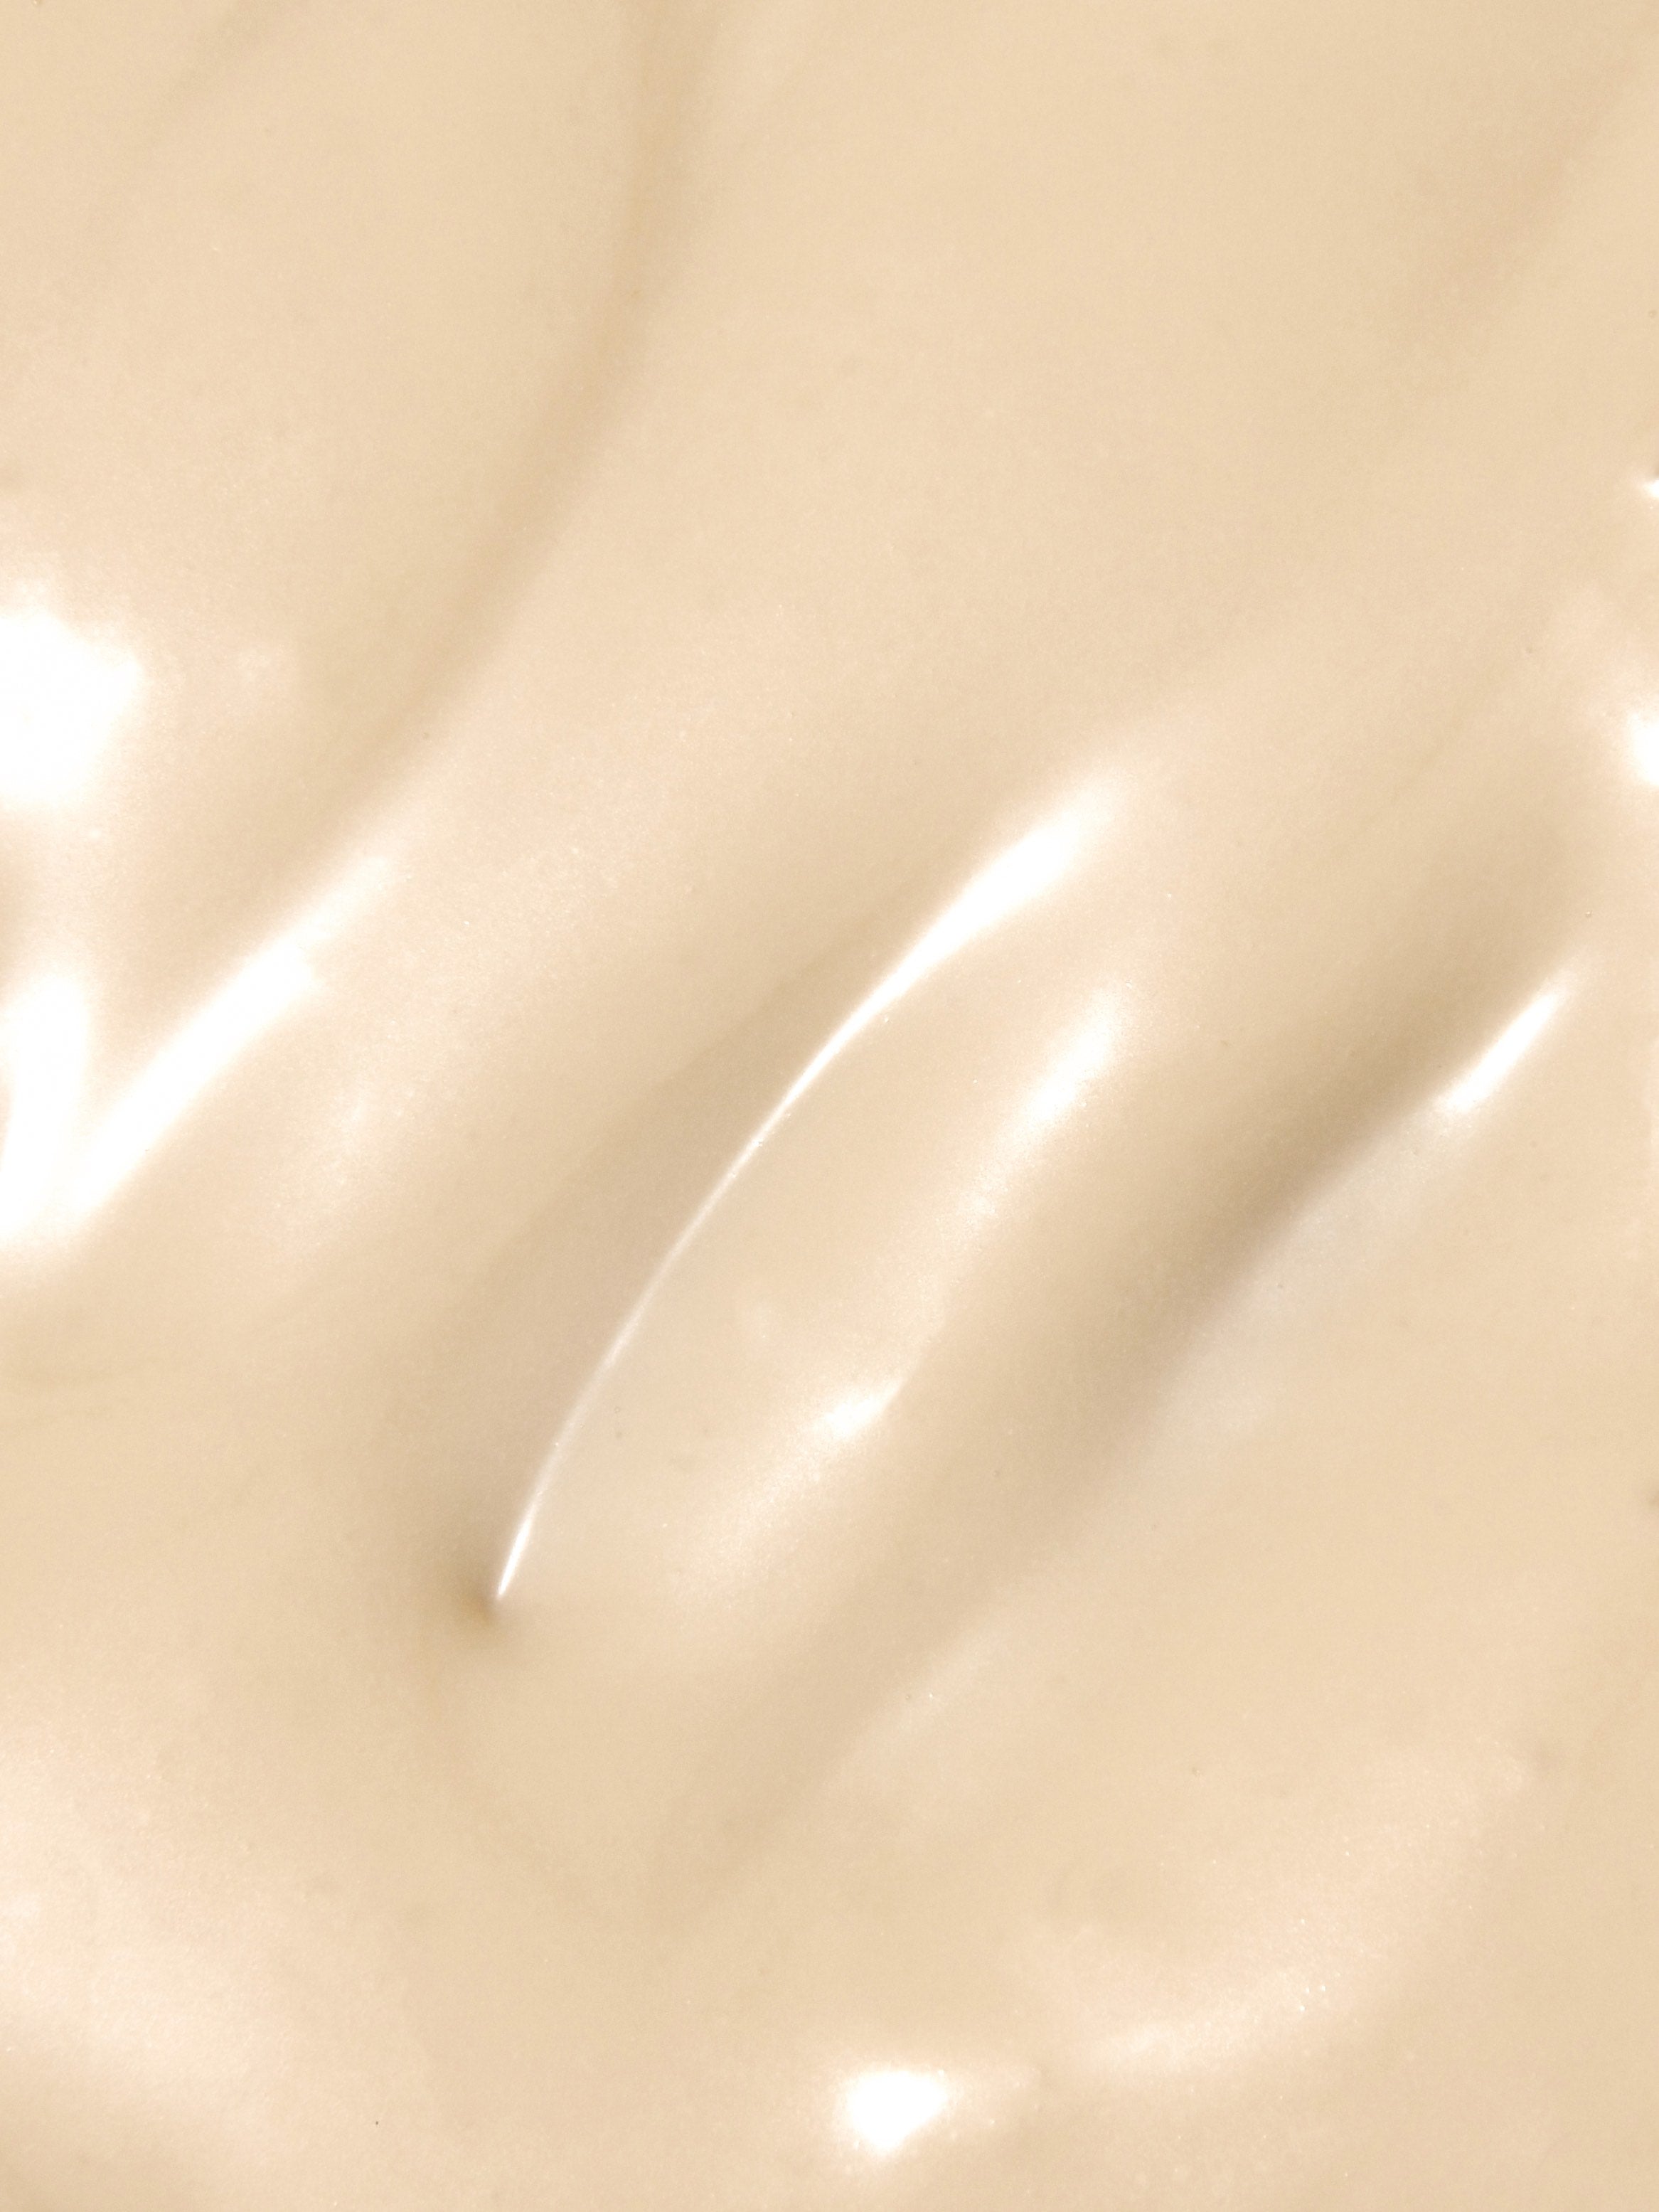 texture shot of resurfacing sleep mask. The texture looks glossy and rich